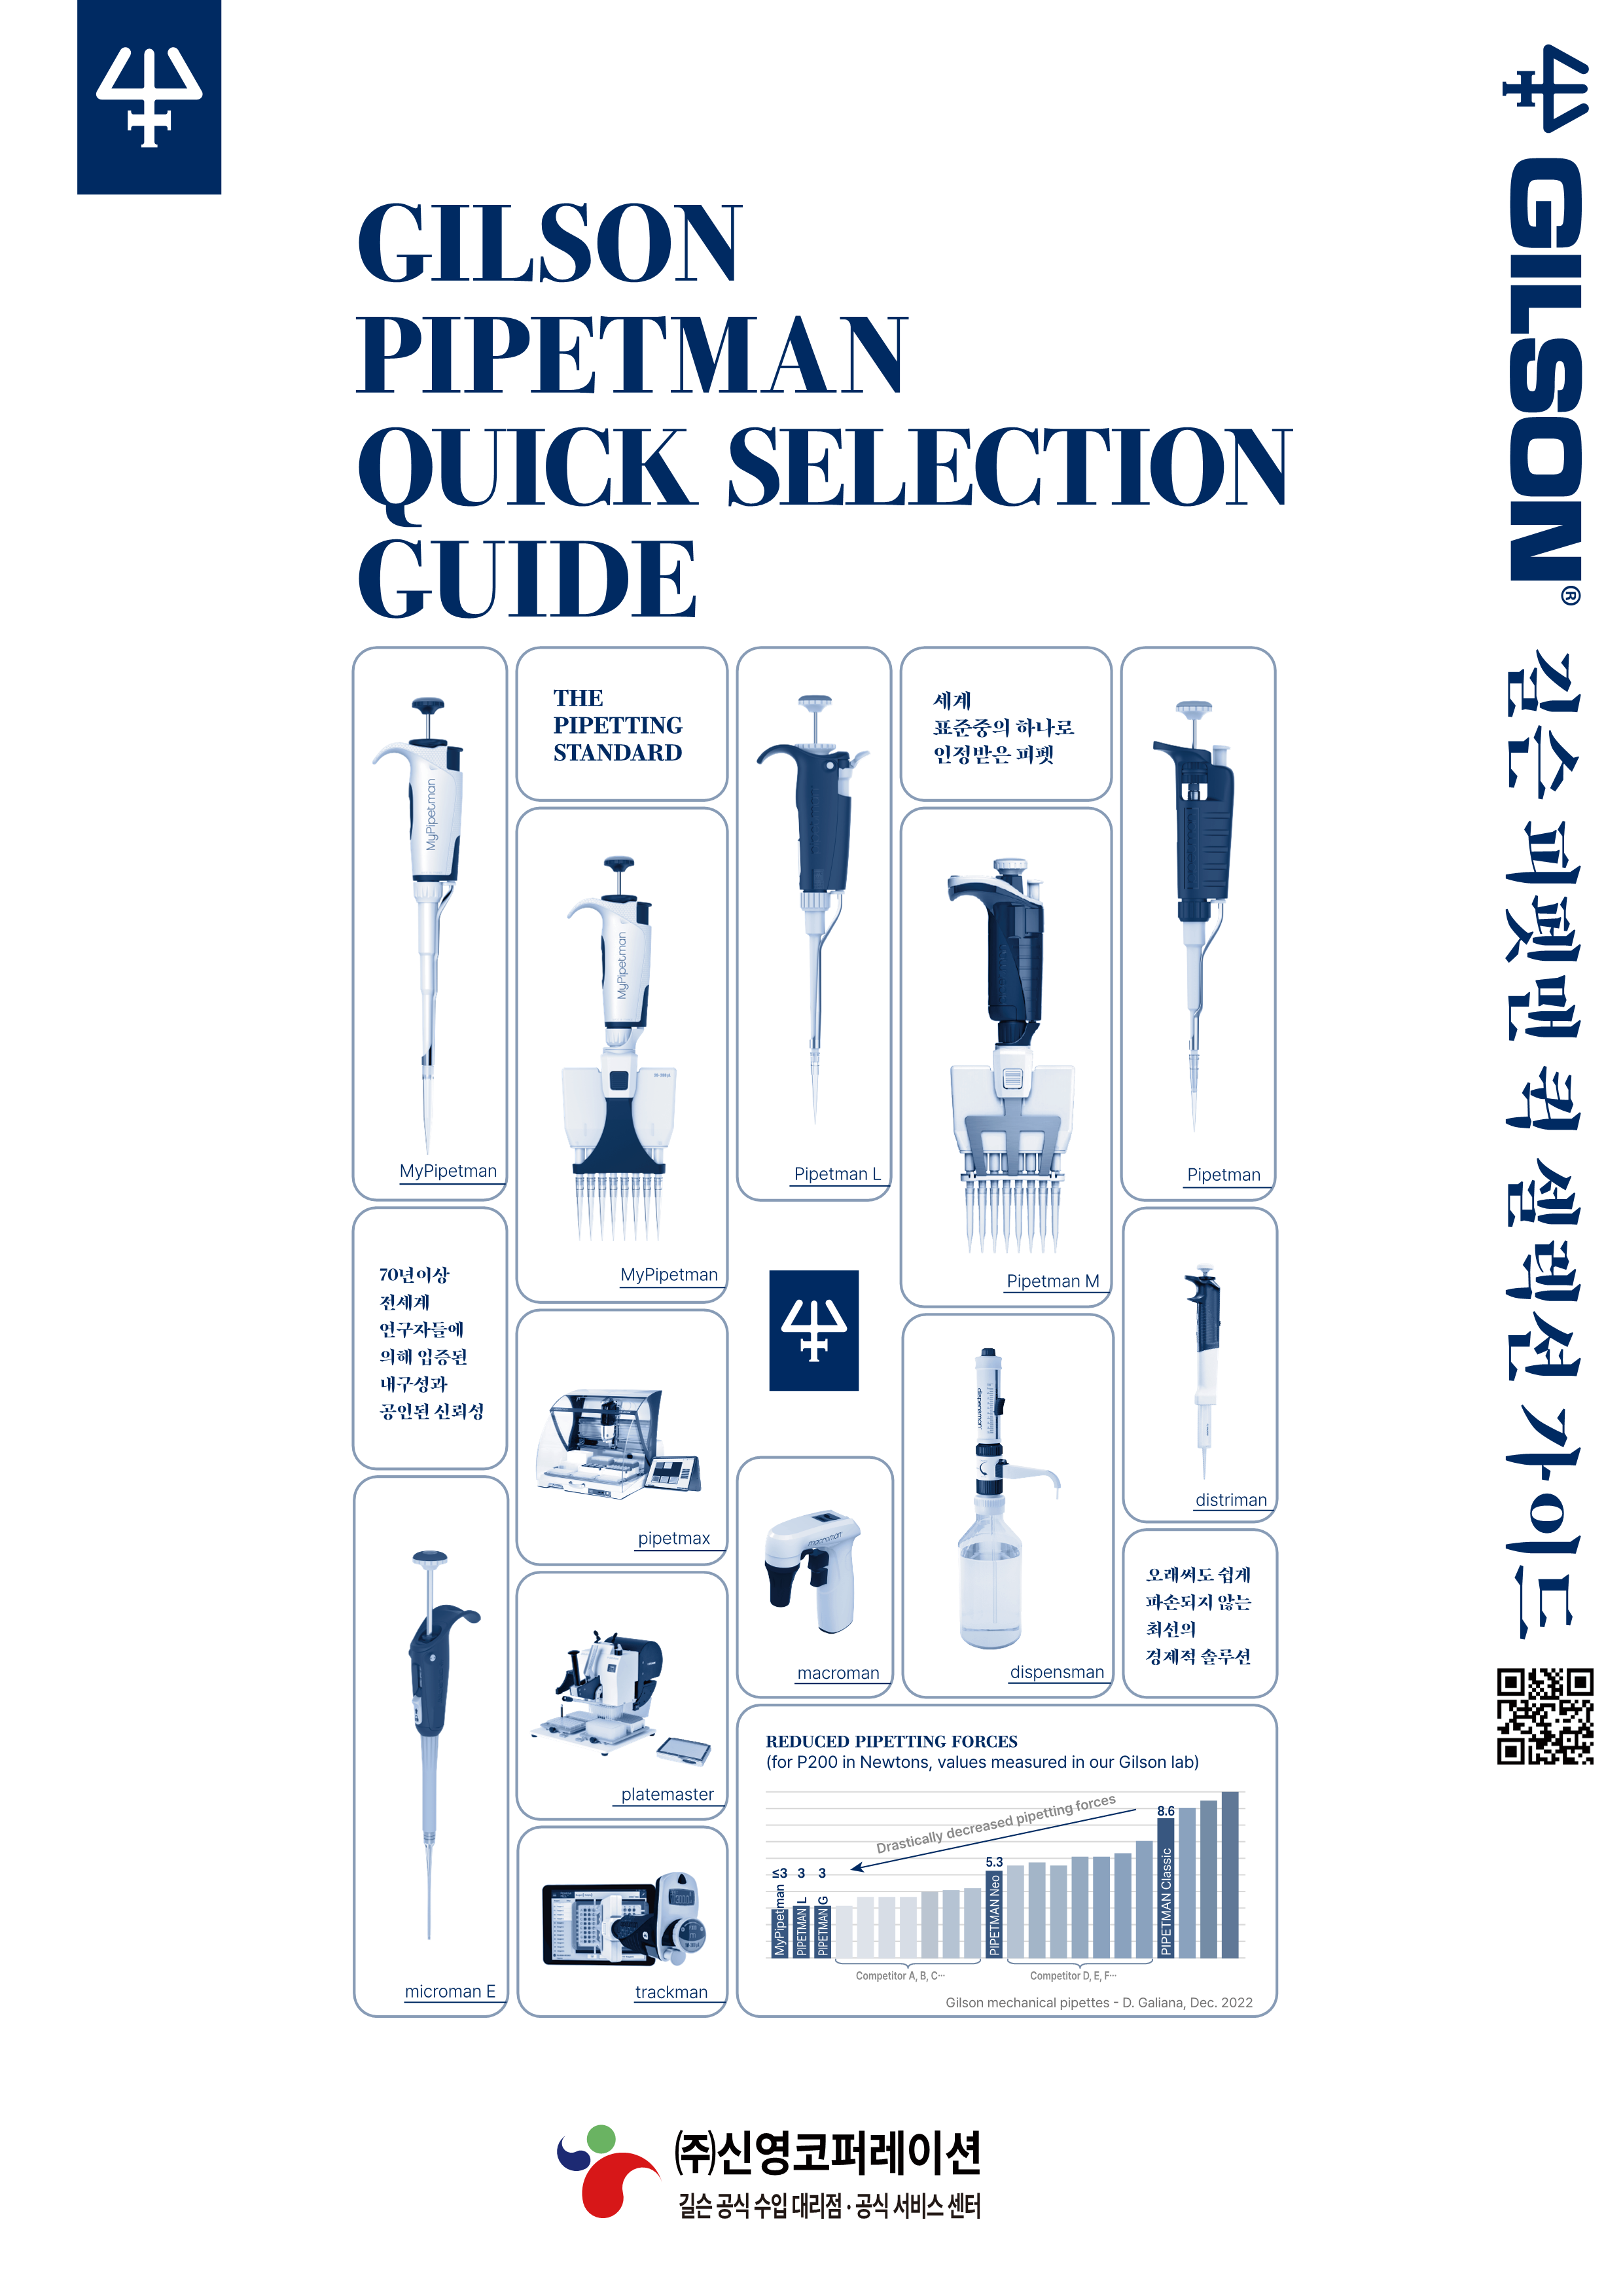 Gilson Pipetman Quick Selection Guide_1.png